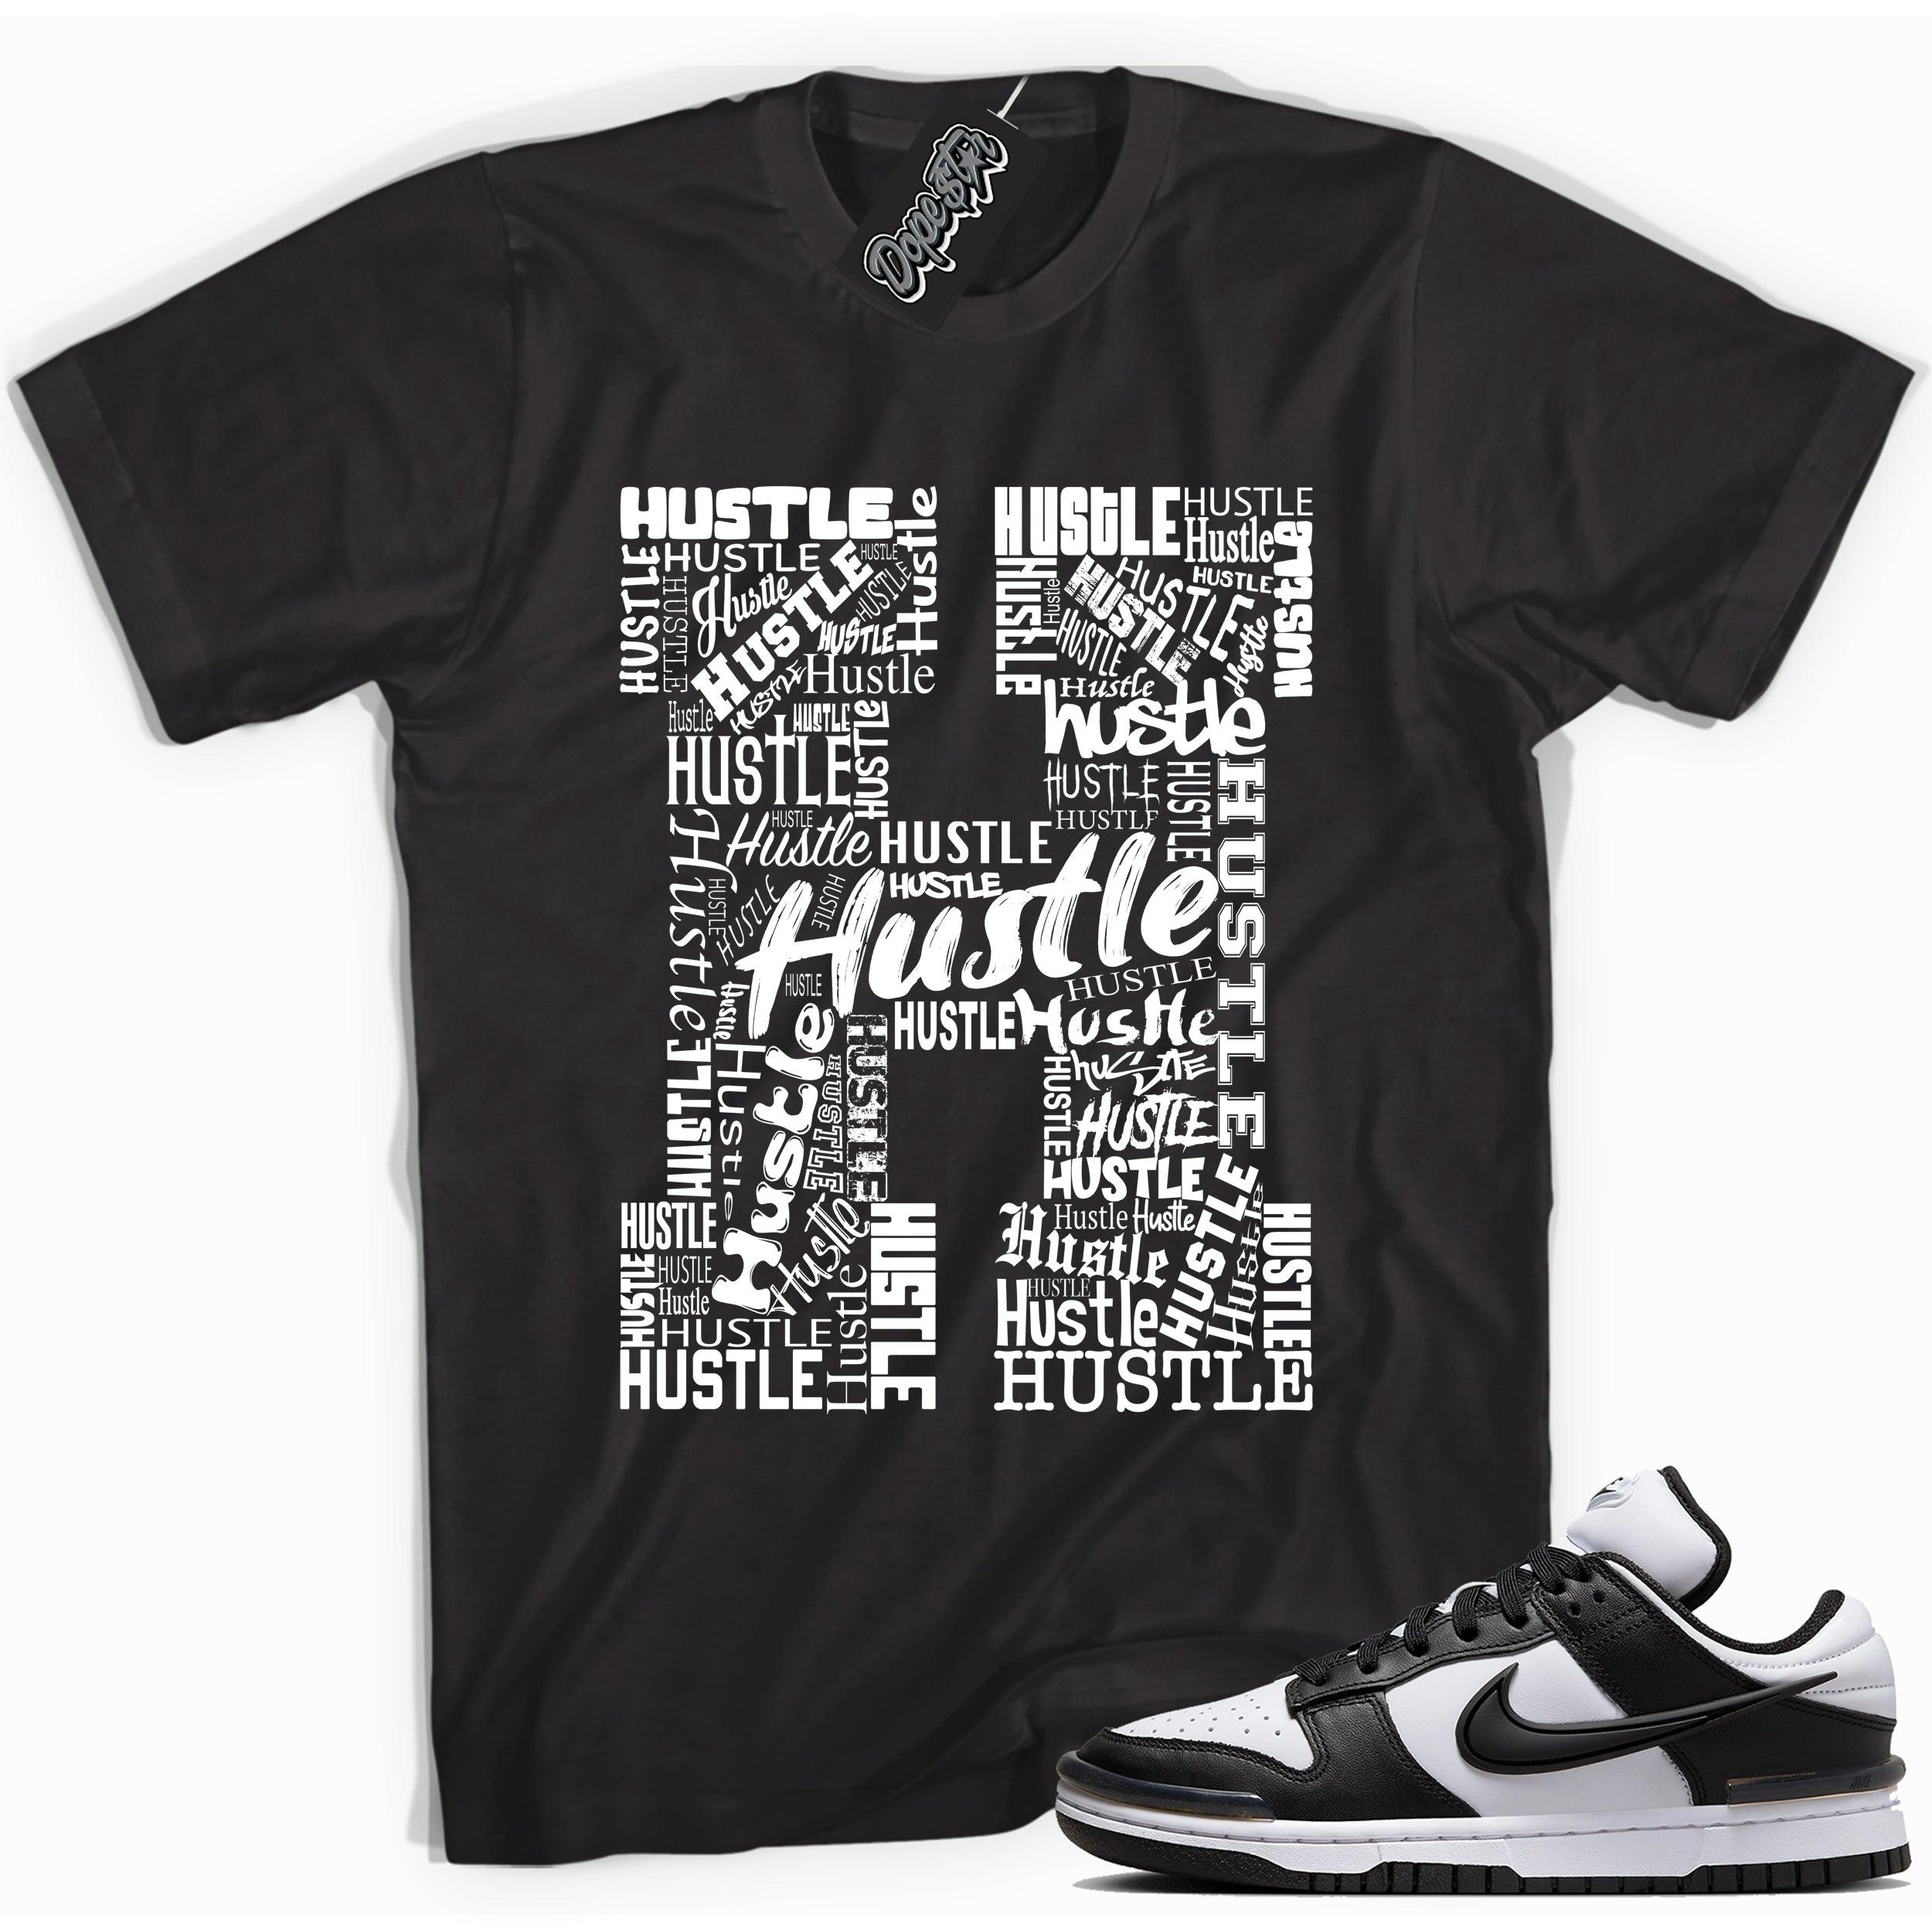 Cool black graphic tee with 'hustle' print, that perfectly matches Nike Dunk Low Twist Panda sneakers.